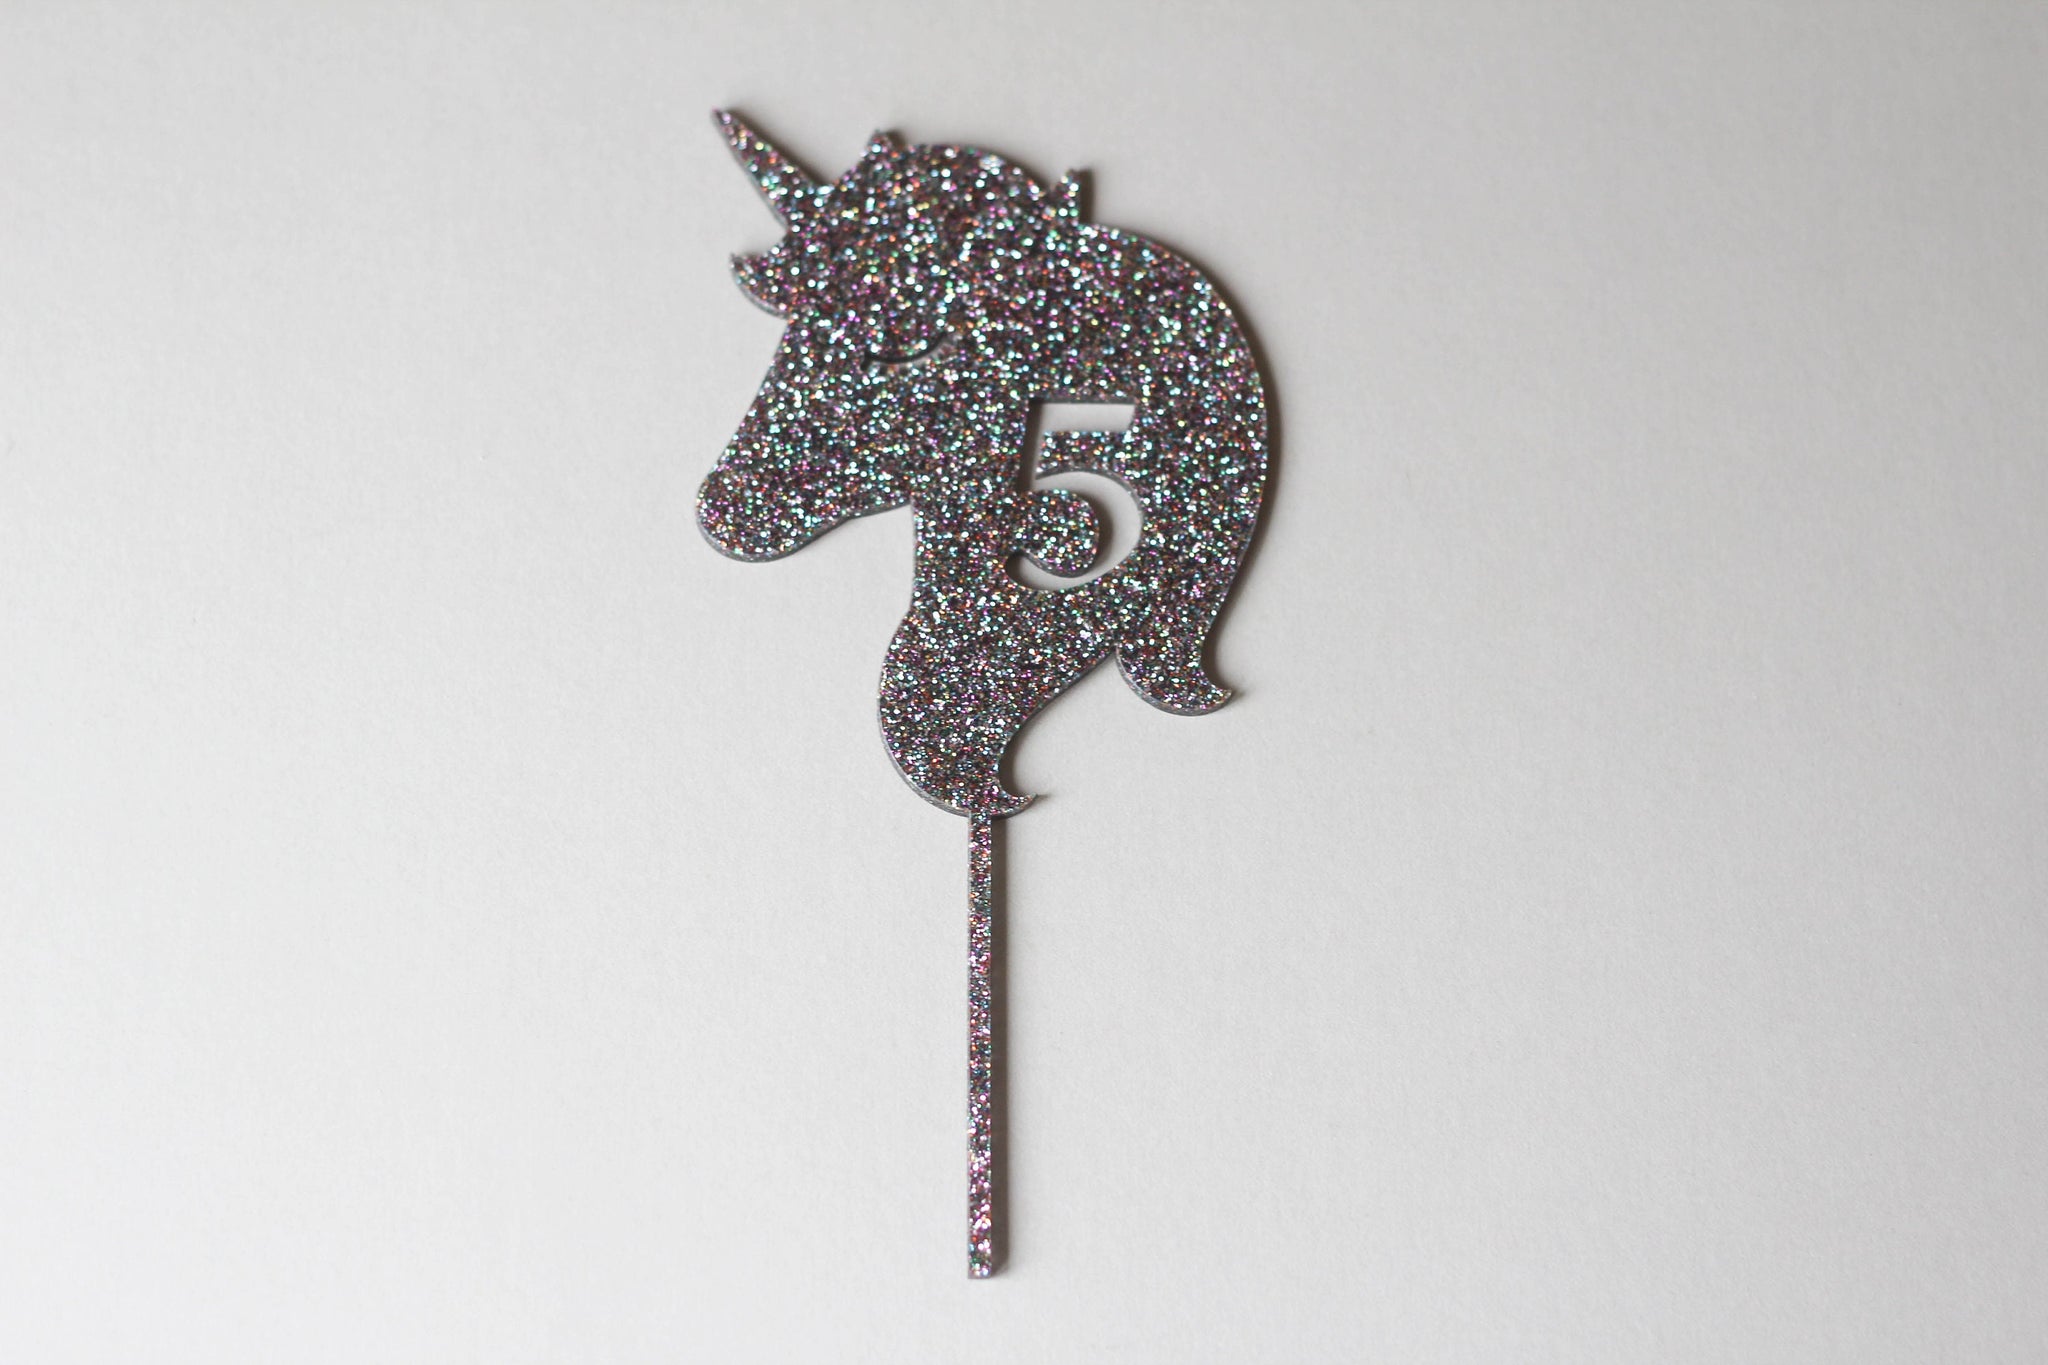 Glitter Unicorn Cake Topper Perfect For A Sparkly And Magical Unicorn Themed Birthday Party, Happy Birthday Cake Topper